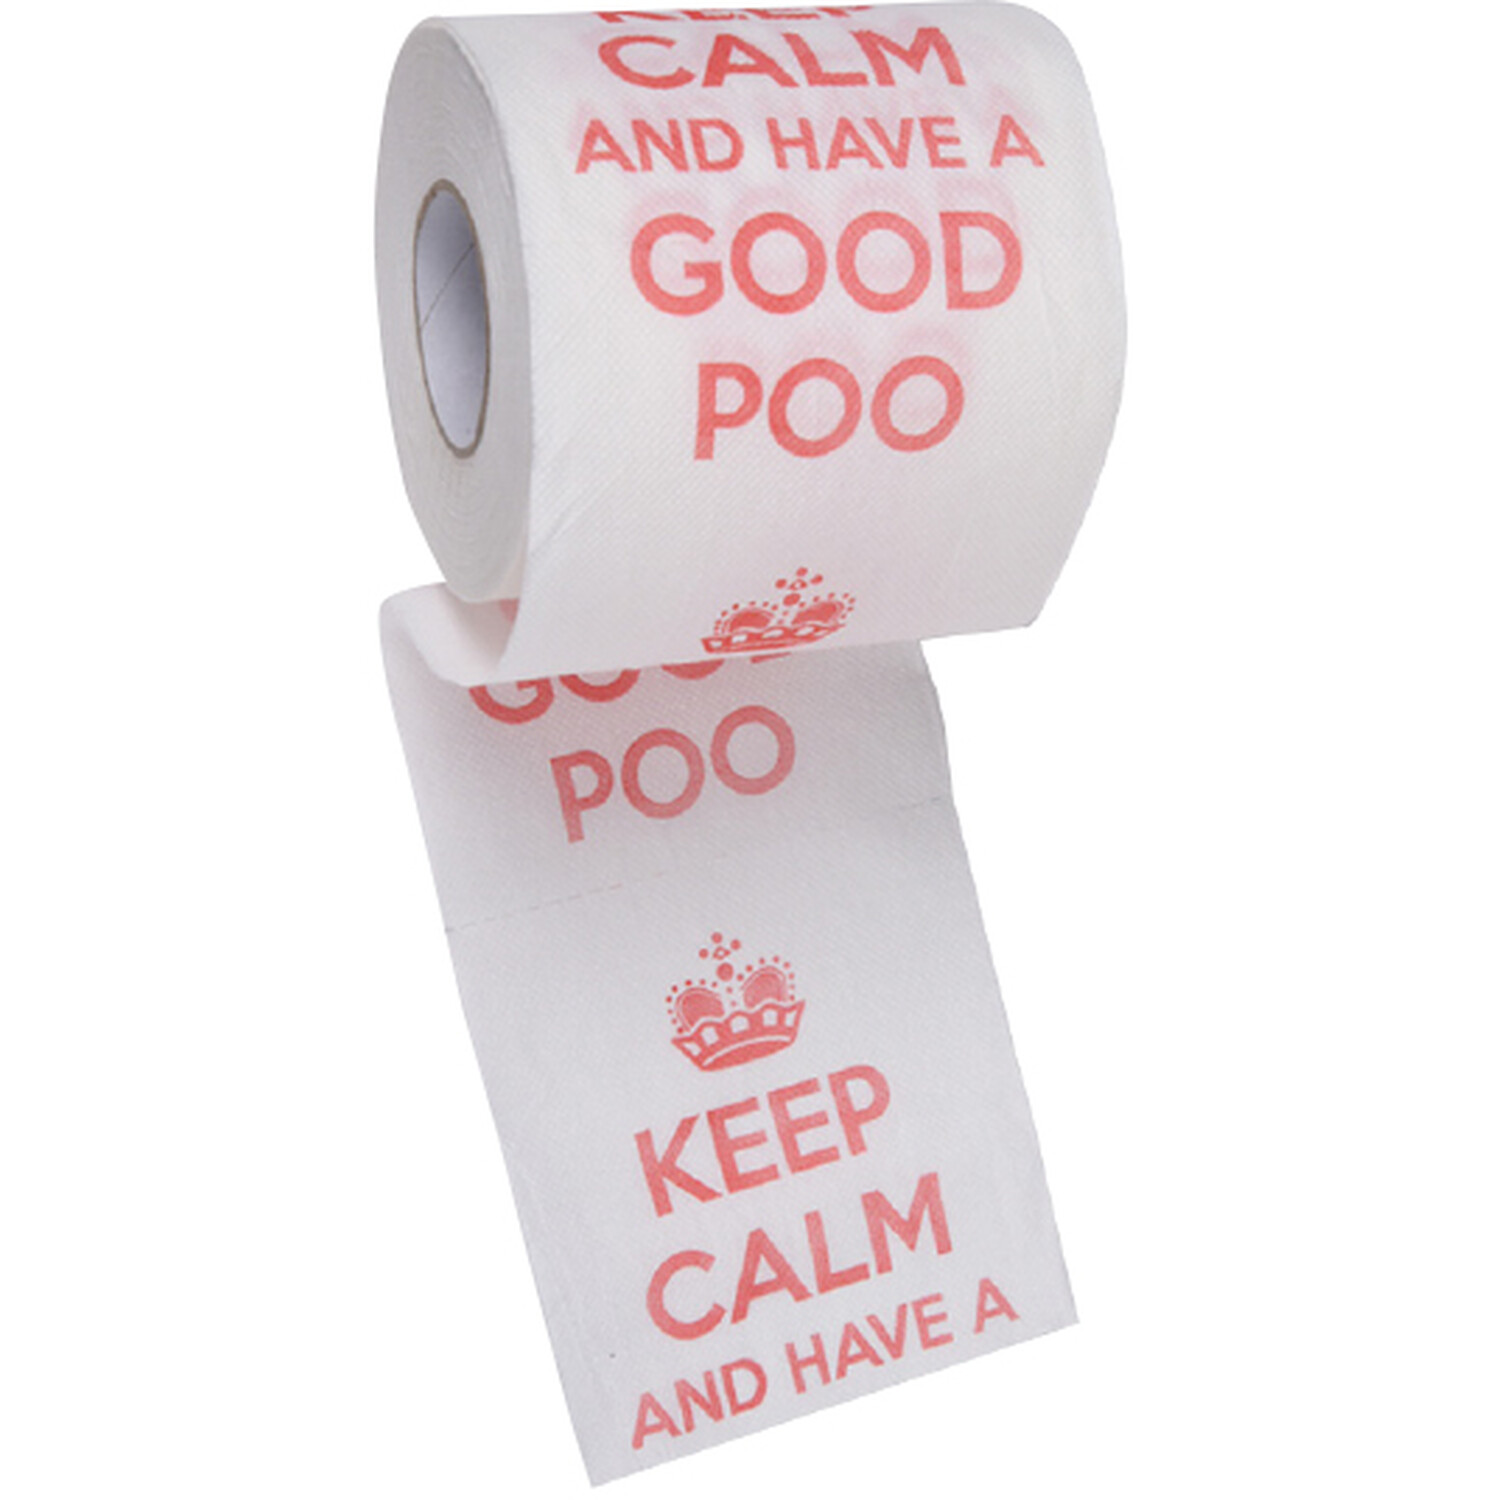 Keep Calm and Have a Good Poo Paper - White Image